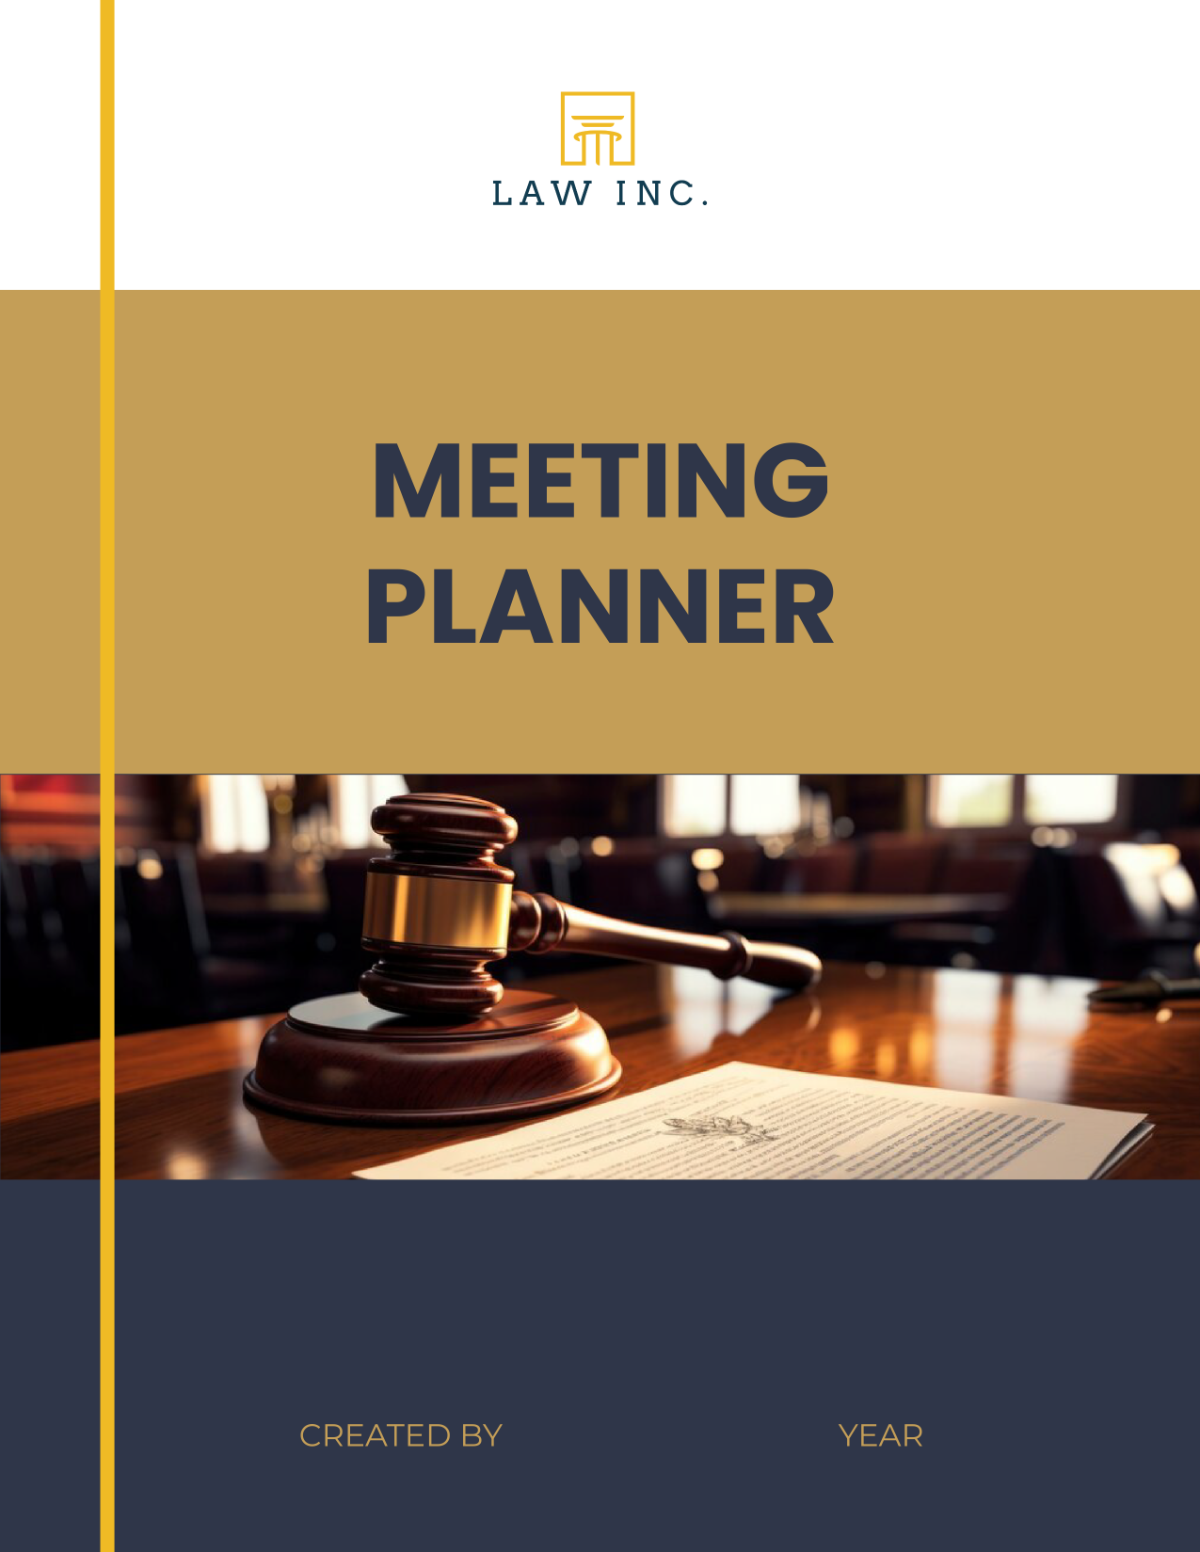 Law Firm Meeting Planner Template